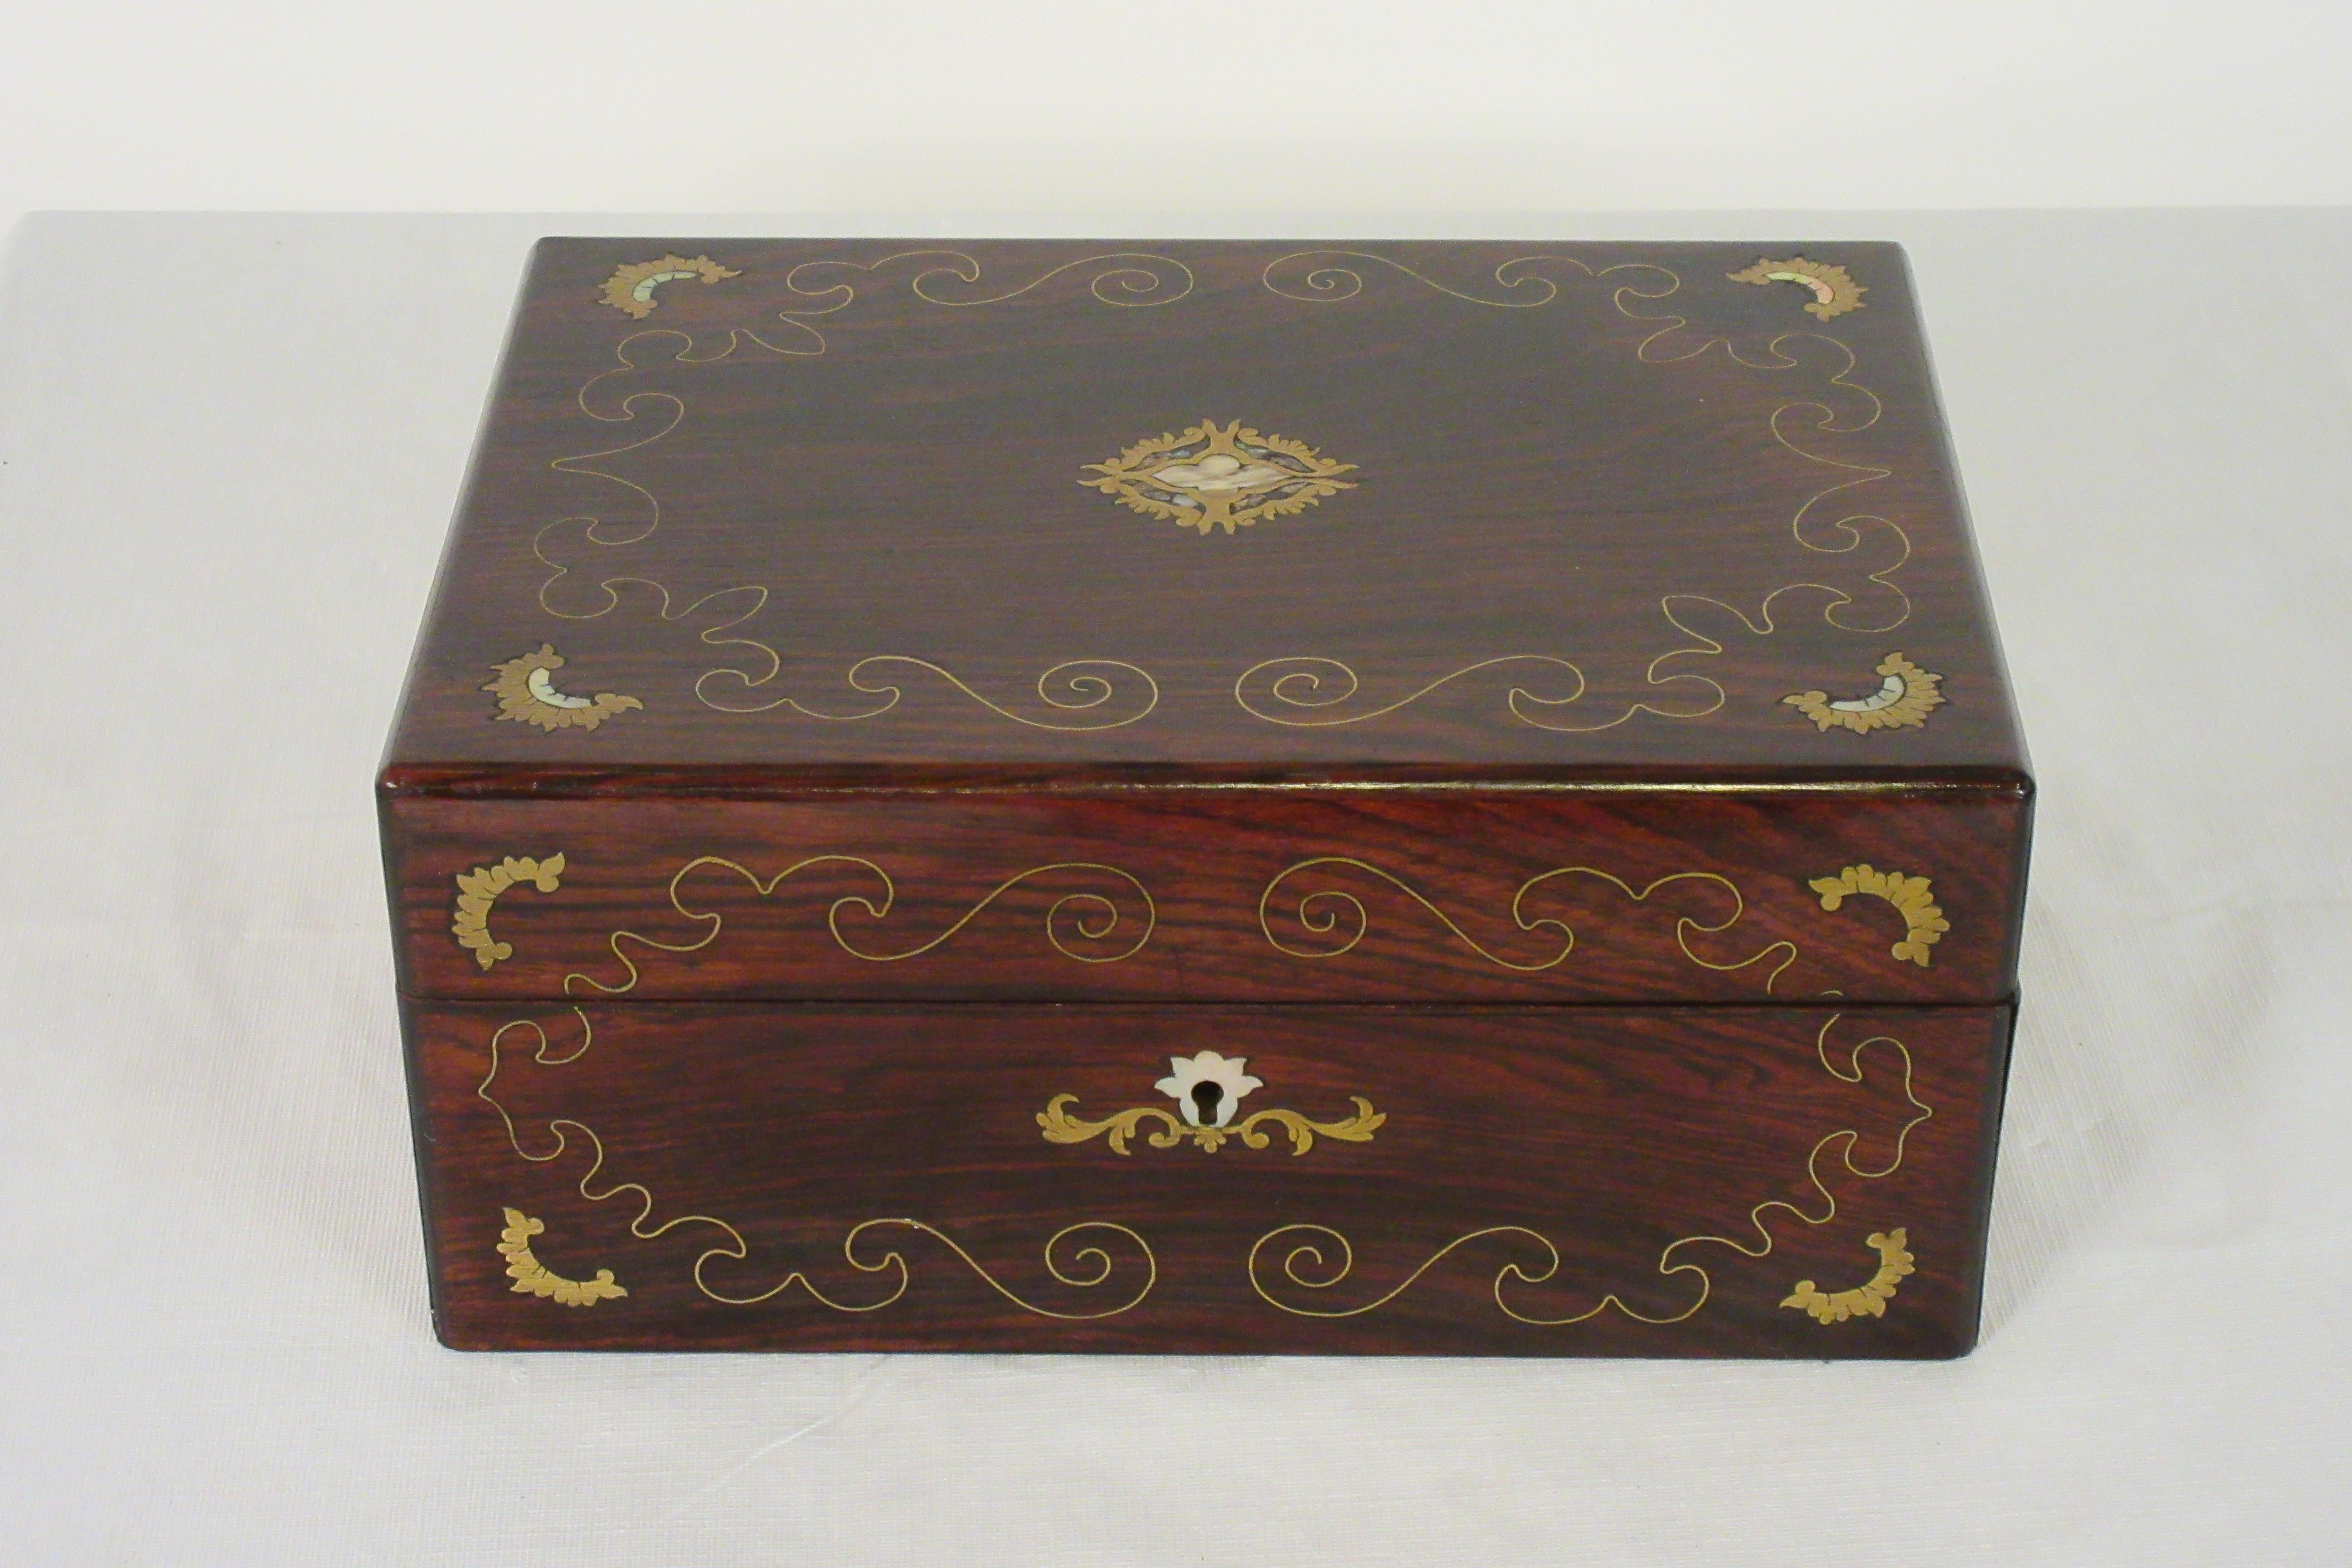 19th century wood and brass inlaid mother of pearl box.